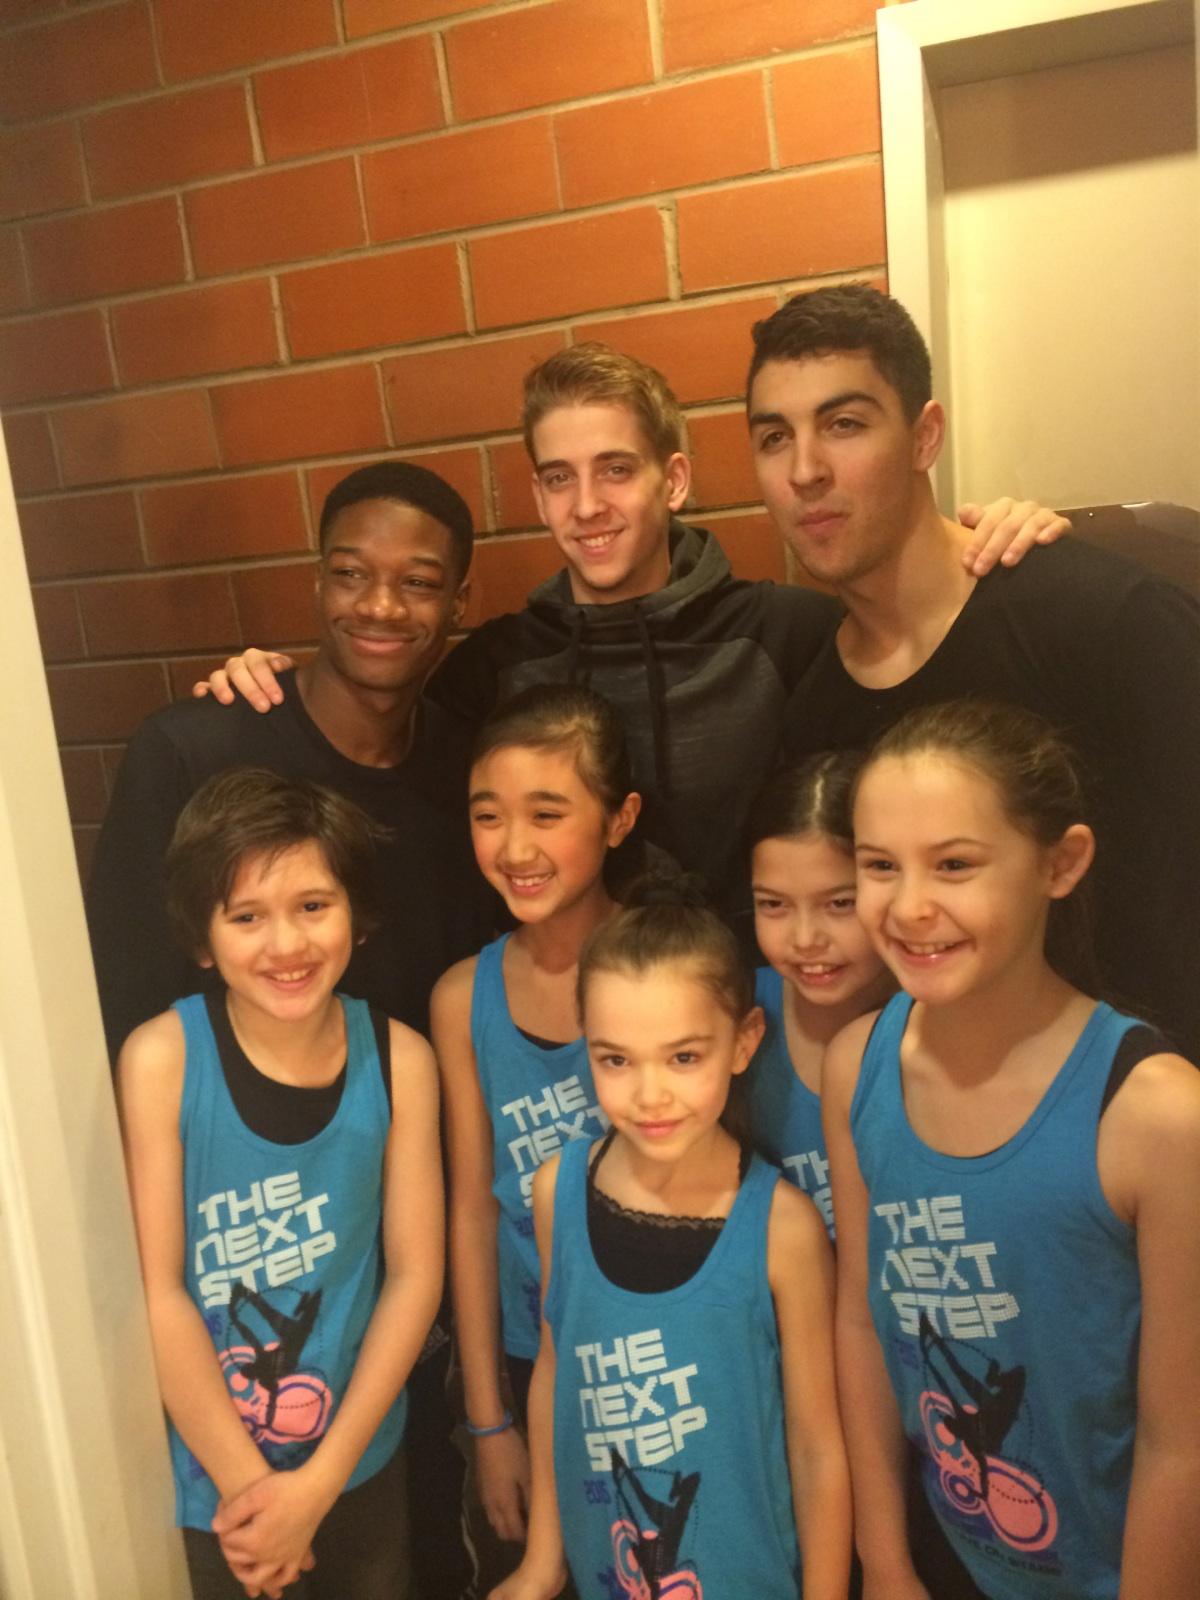 Jaiden backstage with Lamar, Isaac,Trevor and his dance team before they performaned for The Next Step live tour show